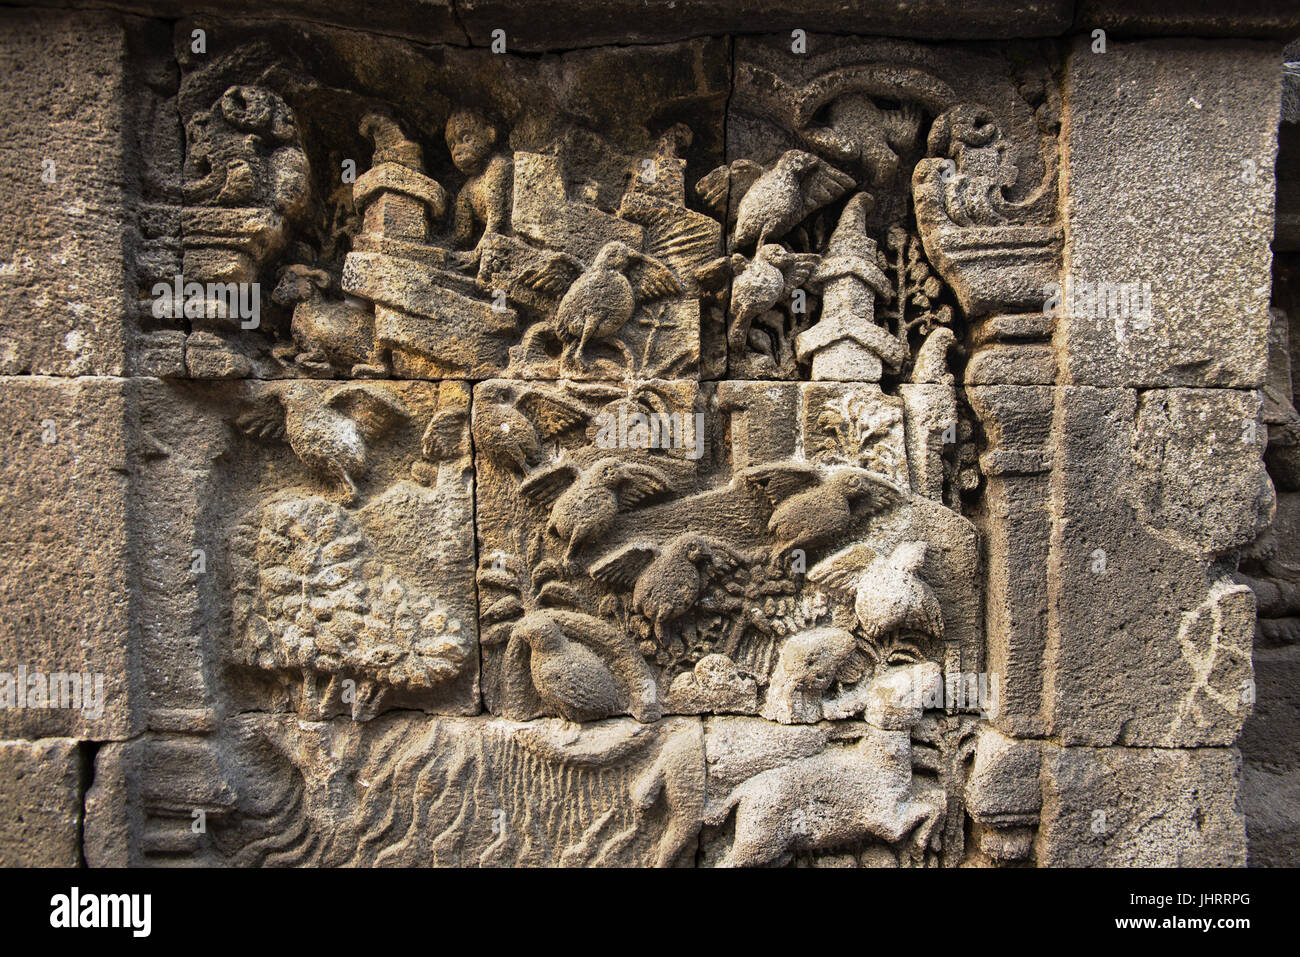 relief Borobudur stock - images hi-res photography gallery Alamy and